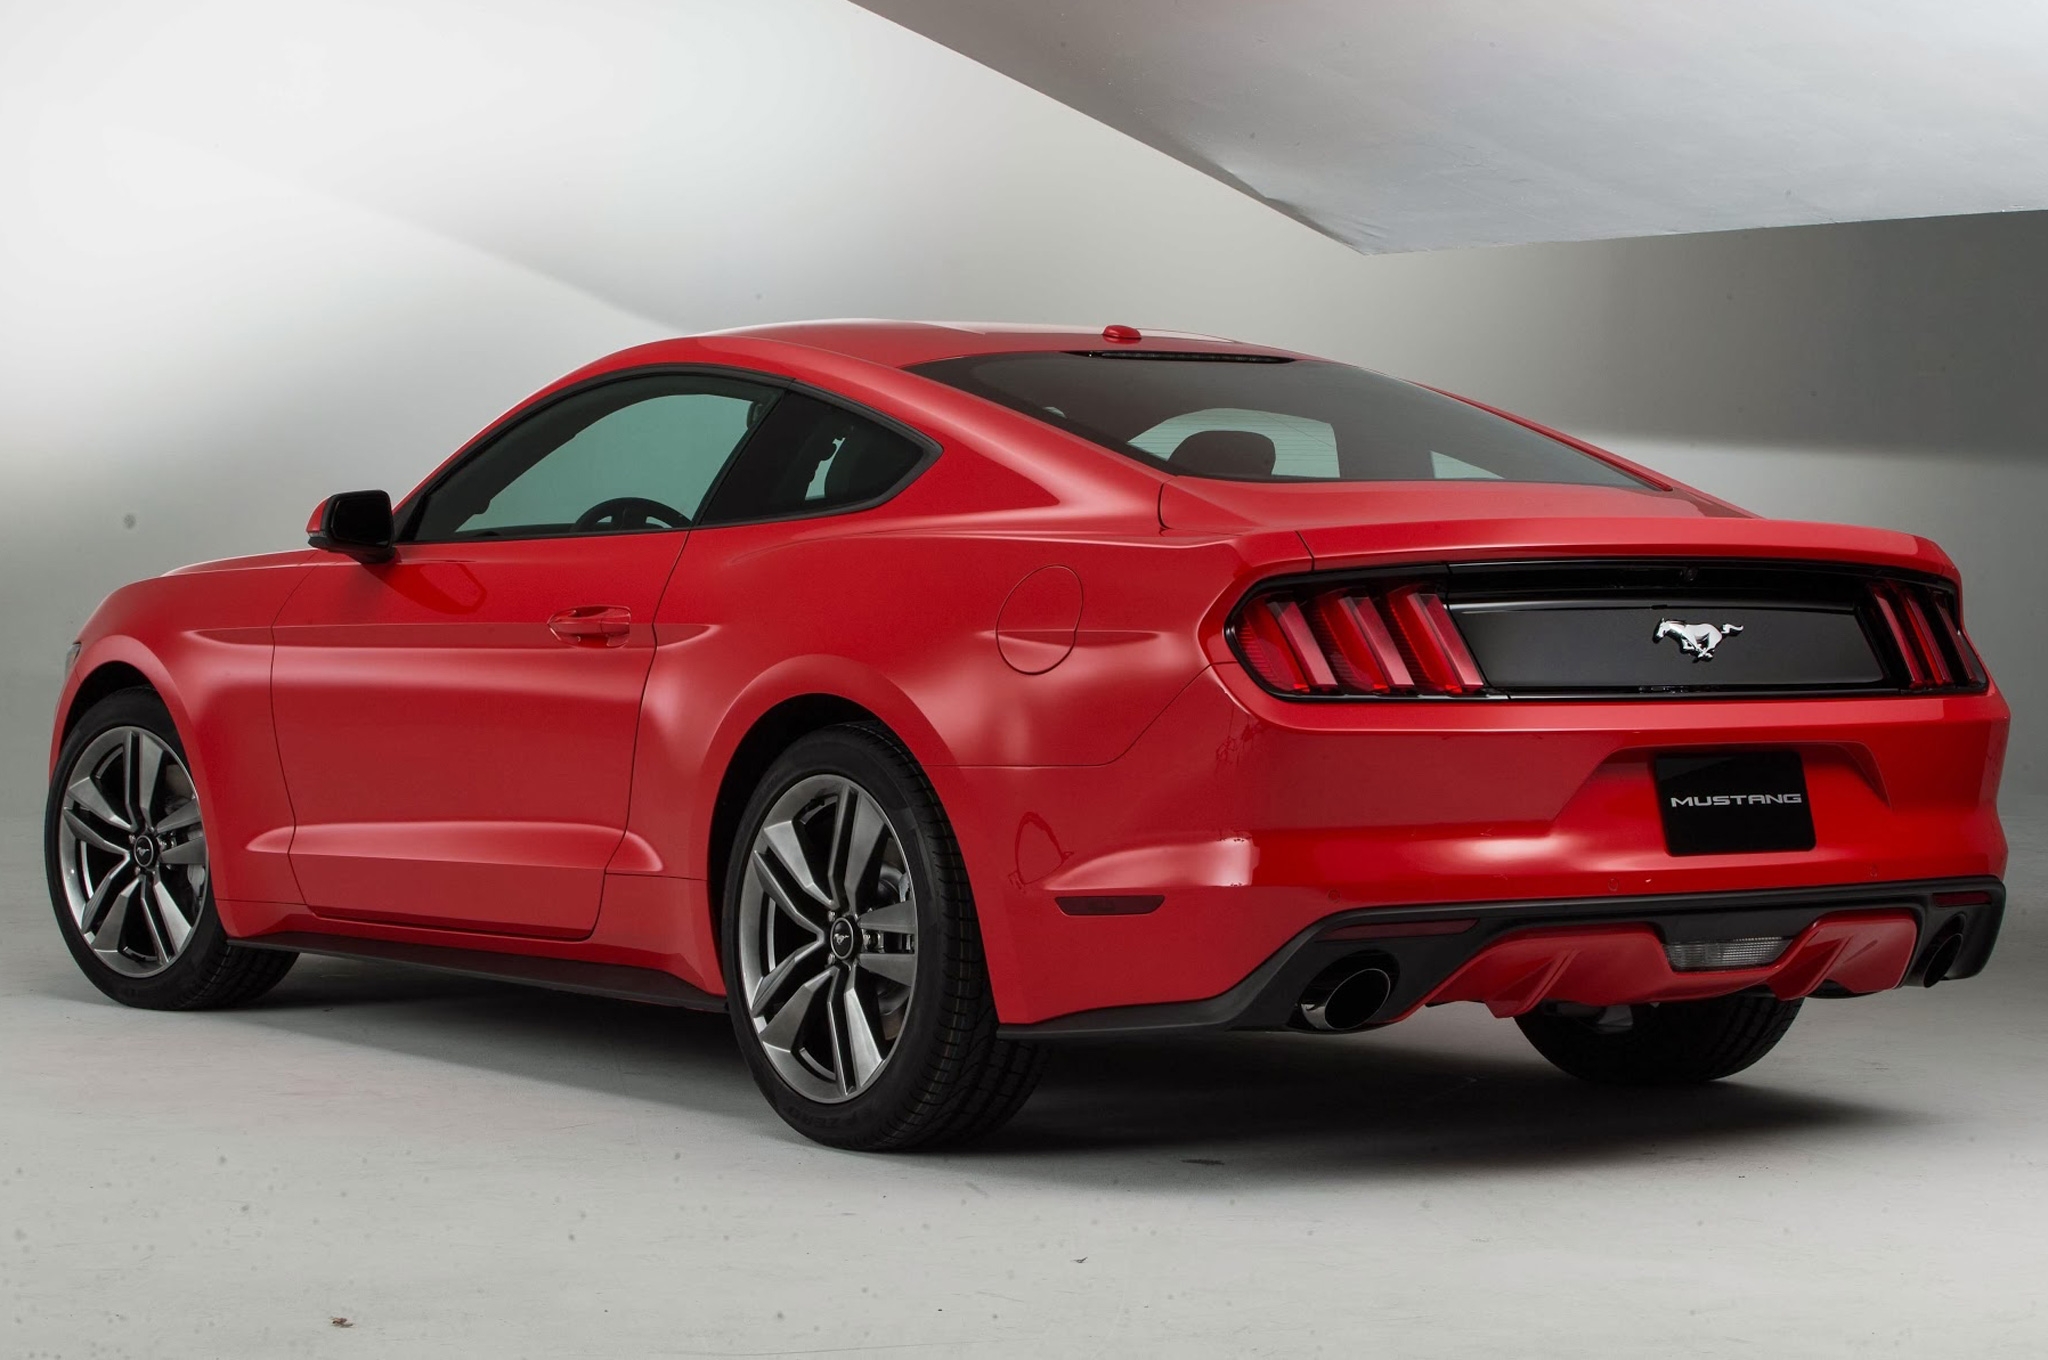 Ford Mustang Convertible: The Stylish Legend